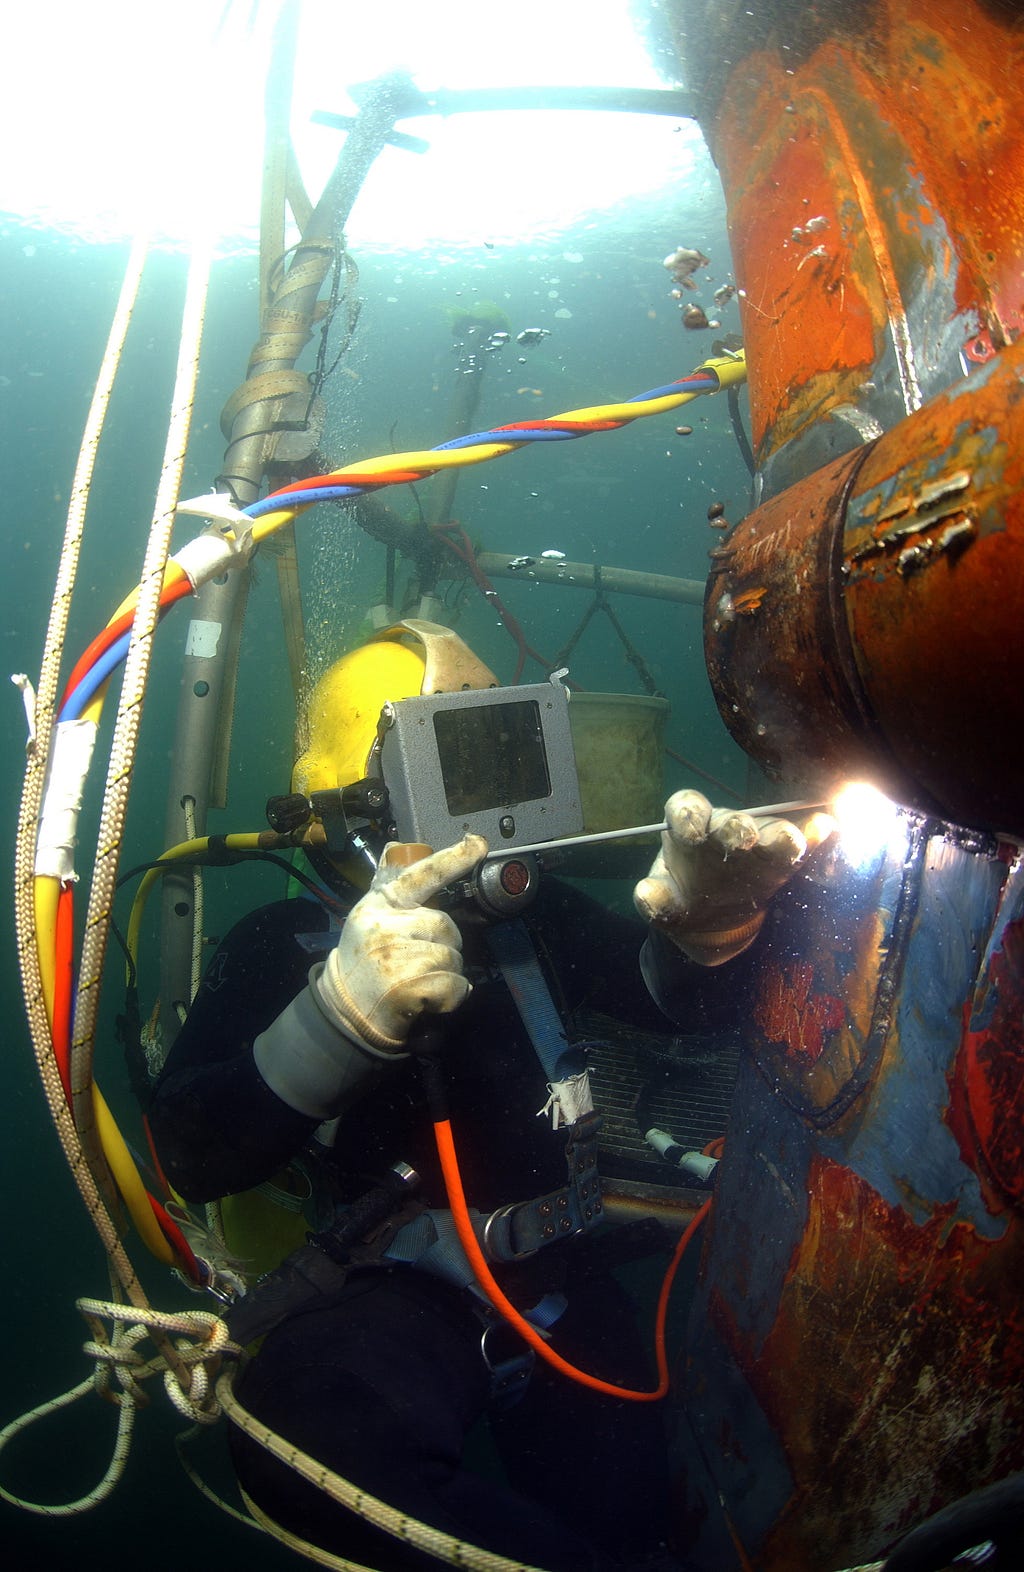 A diver welds a part onto the underwater bow of the ship.